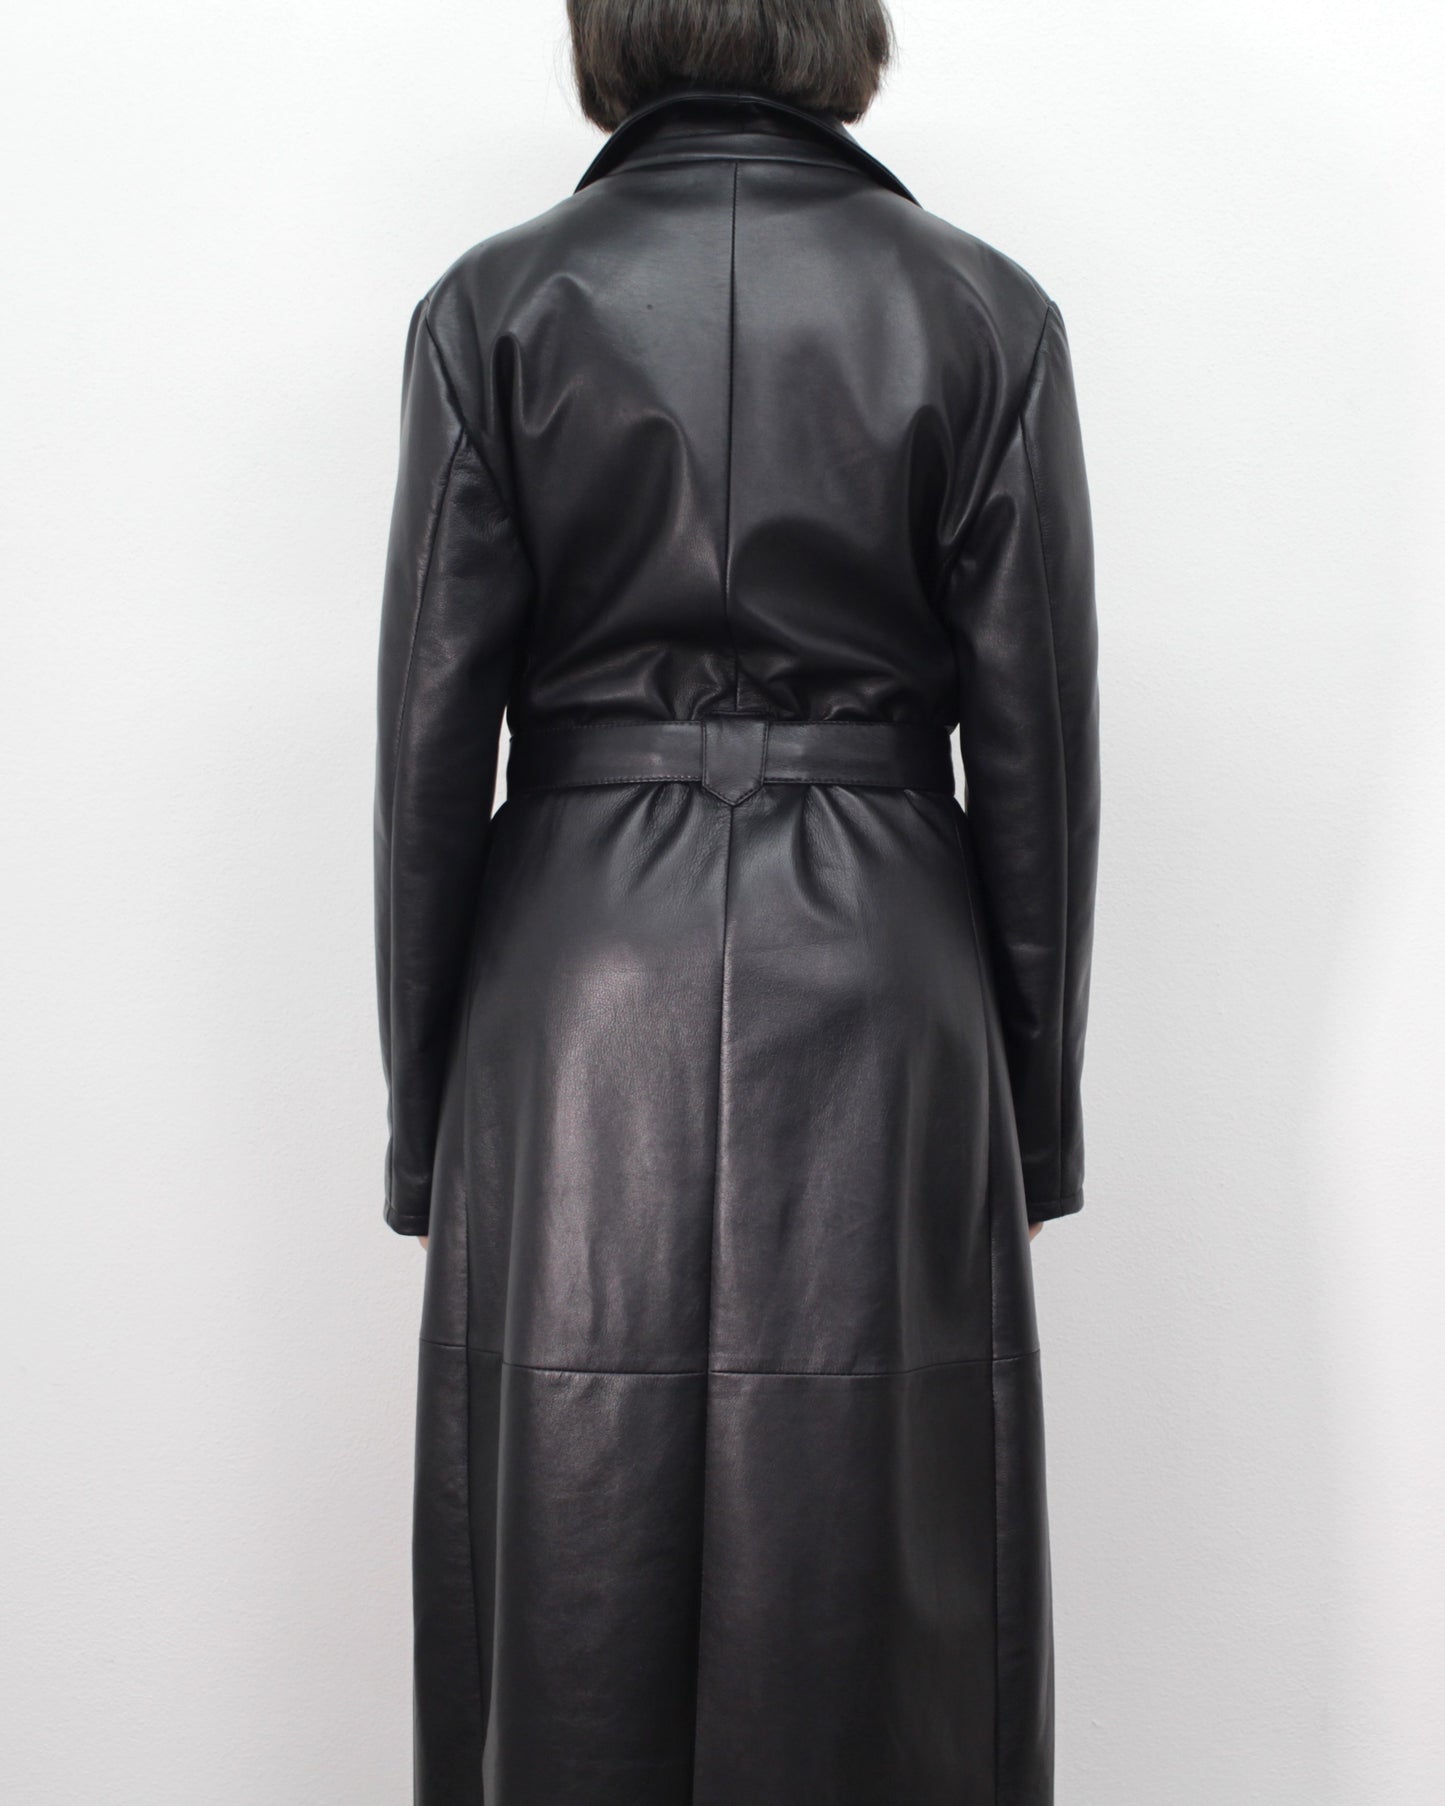 Women's Black Leather Trench Coat - Made in Italy Artisan Collection by Ferdinando Patermo